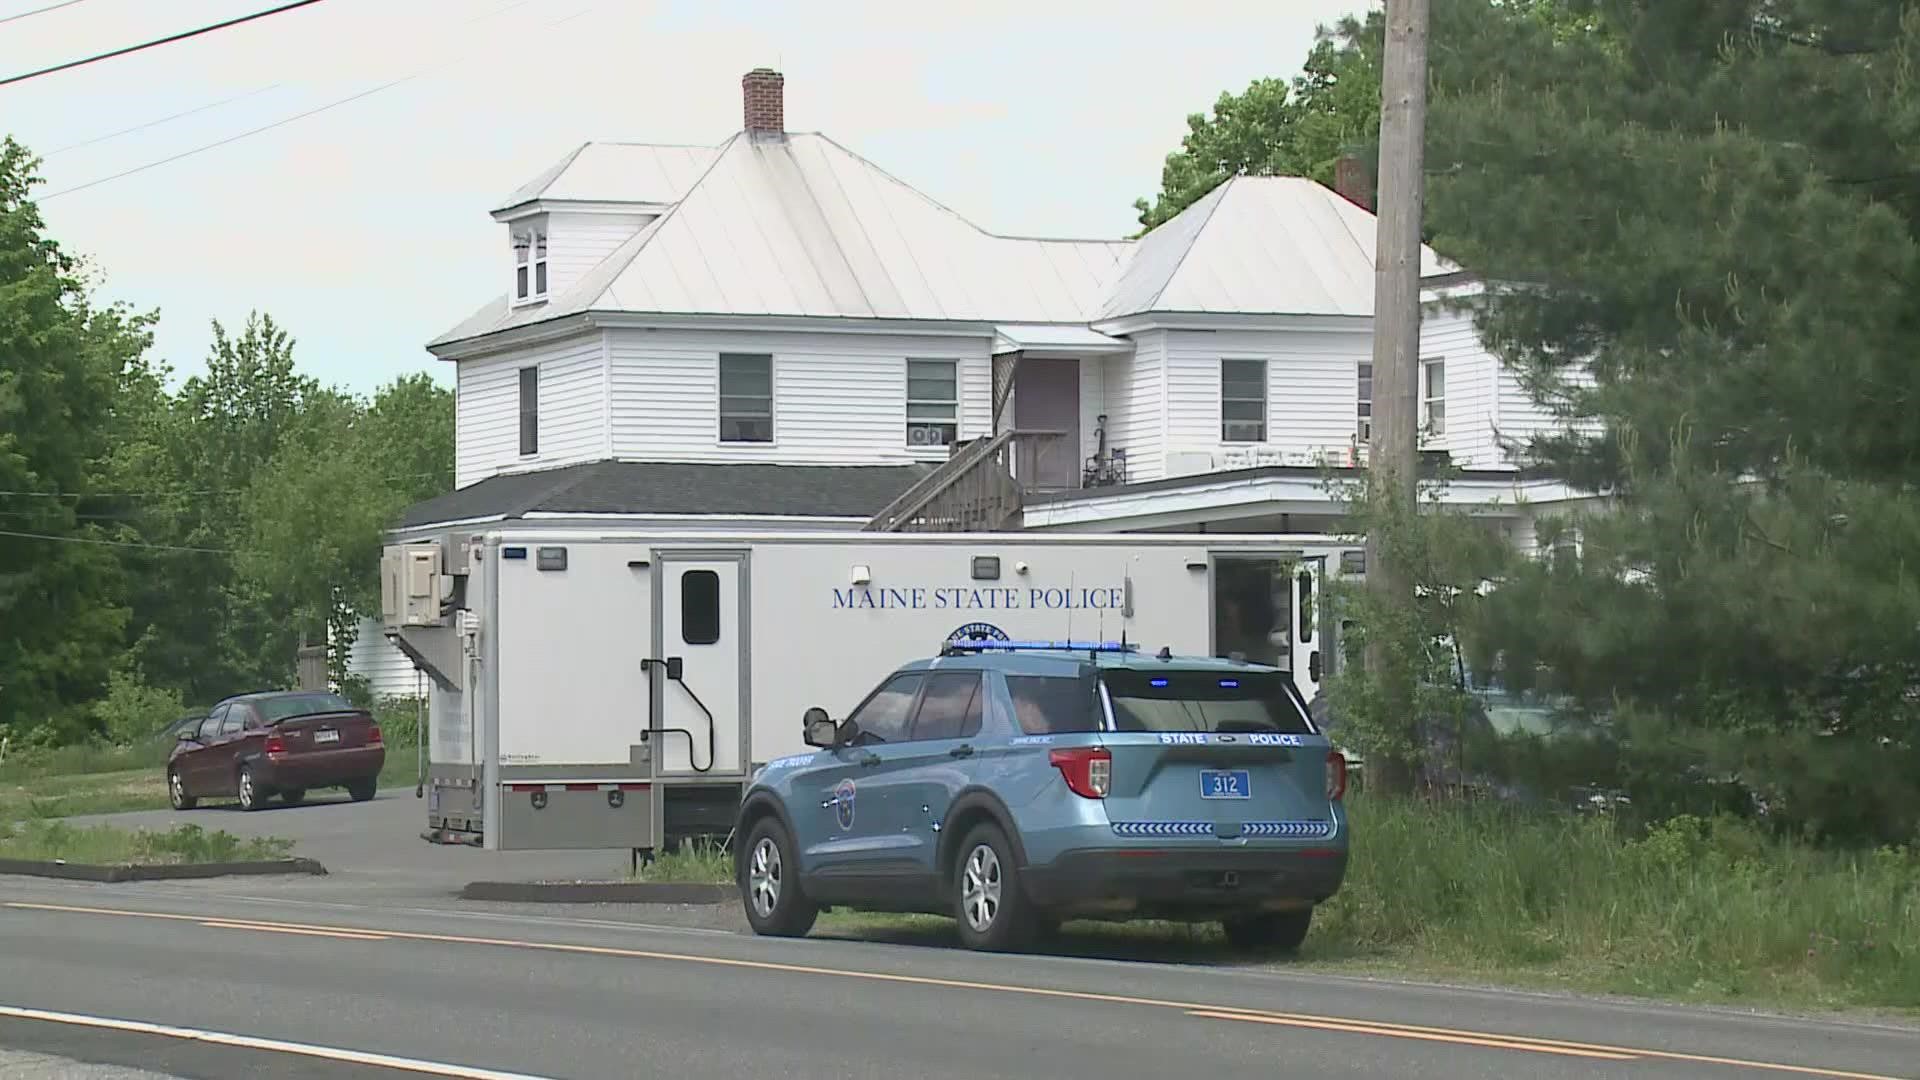 Maine State Police detectives said it appears the man was killed by a gunshot, but the investigation continues.